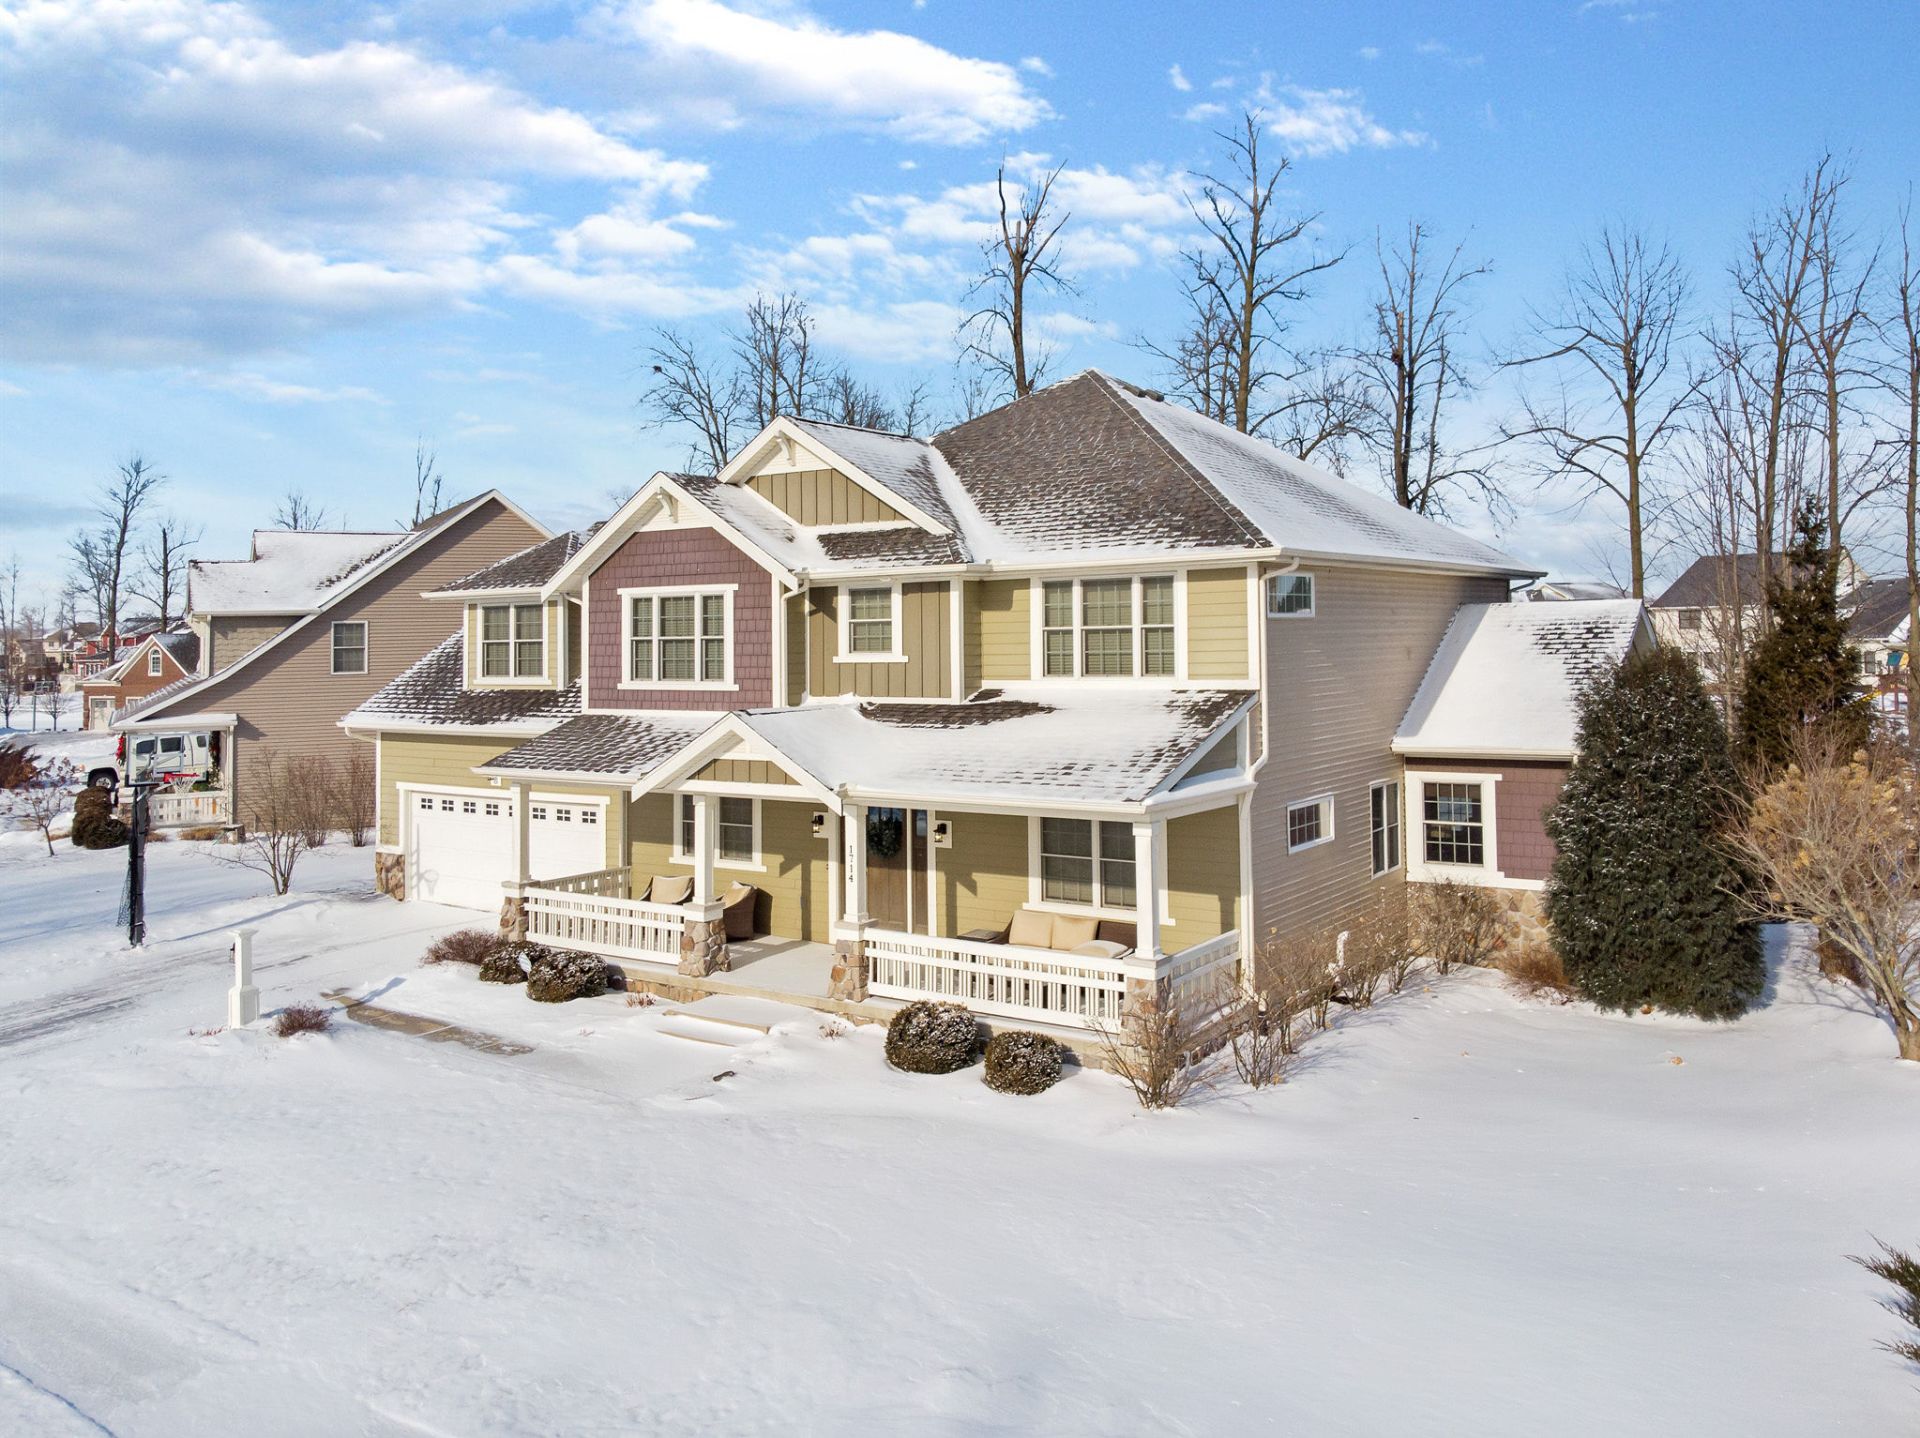 3 Reasons to Sell Your Home in Winter